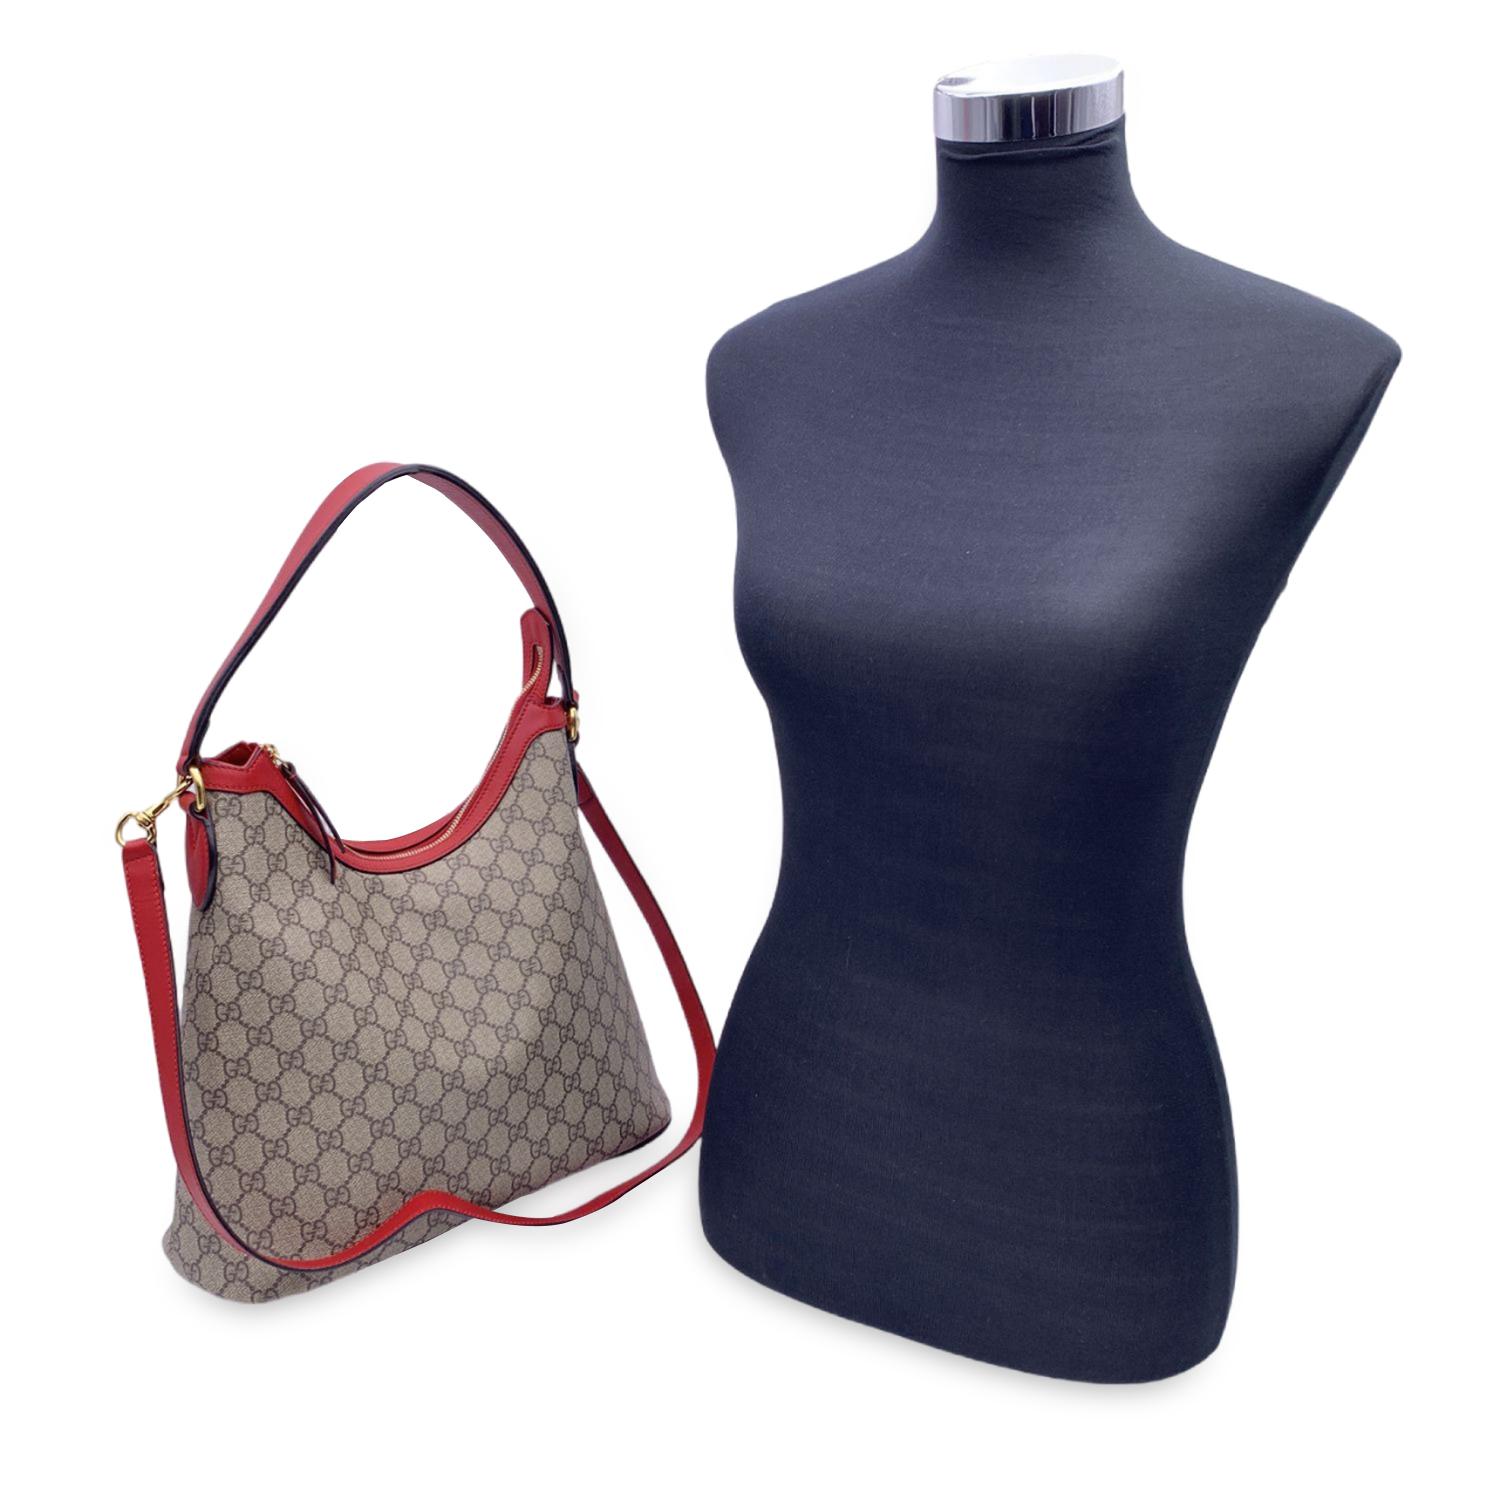 This beautiful Bag will come with a Certificate of Authenticity provided by Entrupy. The certificate will be provided at no further cost.

Beautiful Gucci tote hobo bag crafted in GG Supreme coated canvas, featuring red leather shoulder straps and